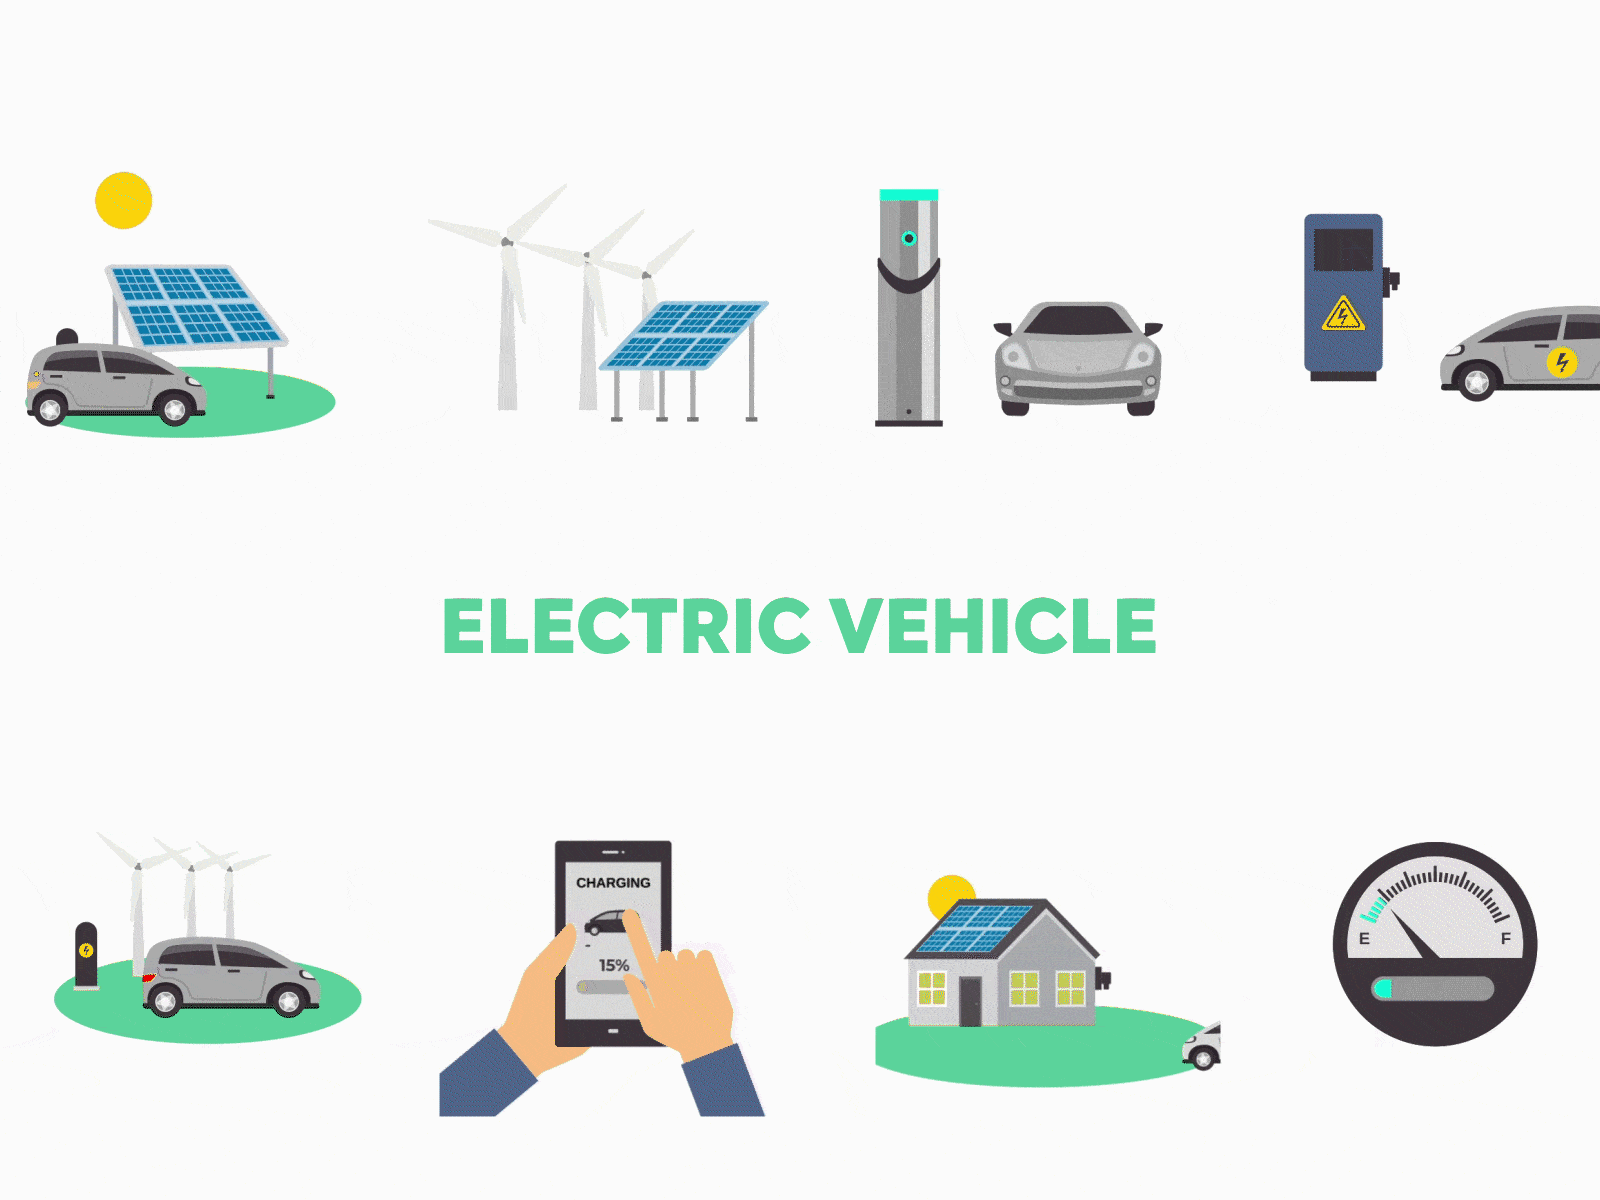 Electric Vehicle Animation Pack by Tamniverse on Dribbble